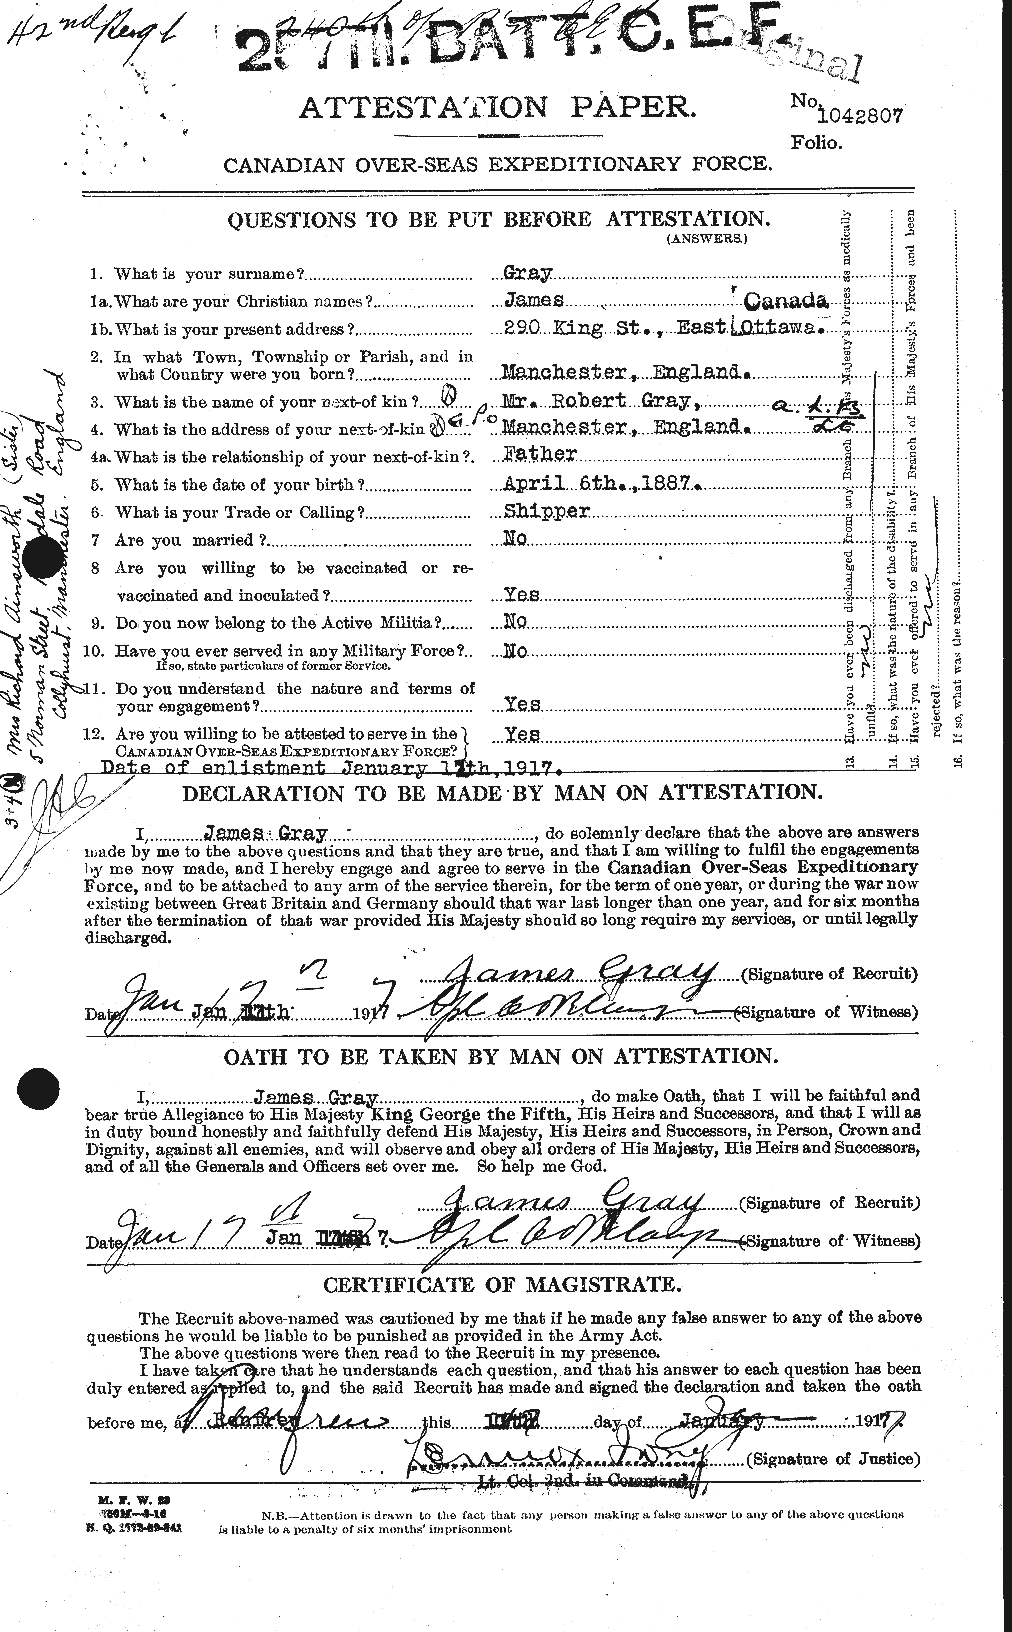 Personnel Records of the First World War - CEF 363280a